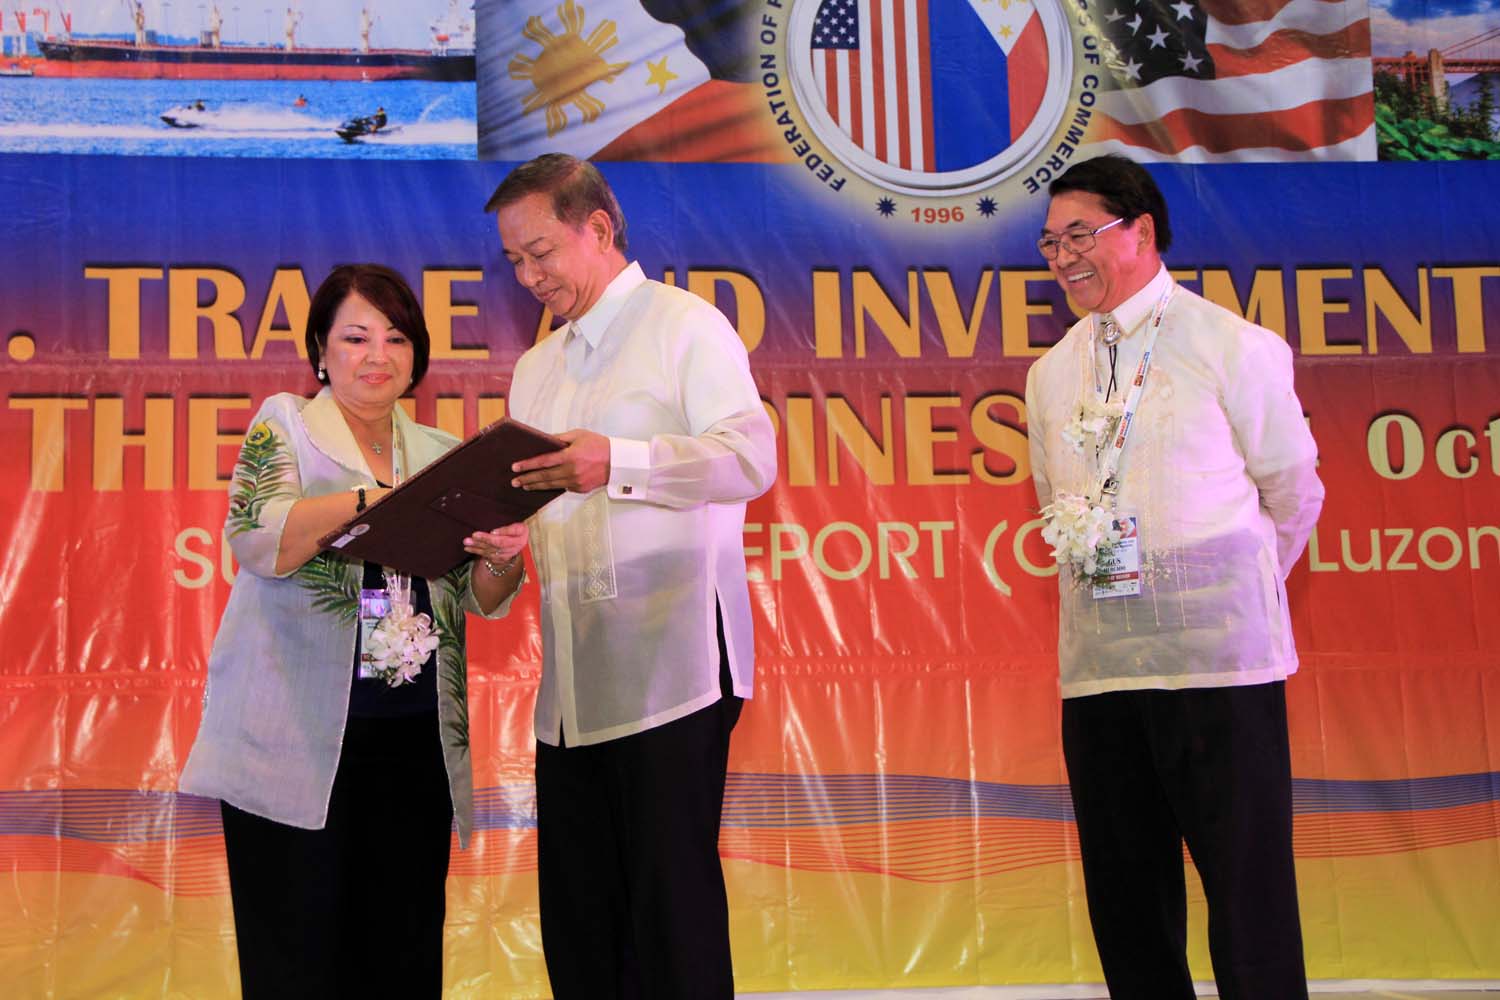 SBMA Chief Operating Officer Joven Reyes receives a certificate of appreciation from Ethel Reyes- Mercado, Honorary Consul General of Texas, USA, during the visit of members of the US Trade Mission on October 20 at the Subic Bay Exhibition and Convention Center. Looking on is Gus Mercado (right), executive director of the Federation of Philippine-American Chambers of Commerce and head of mission.